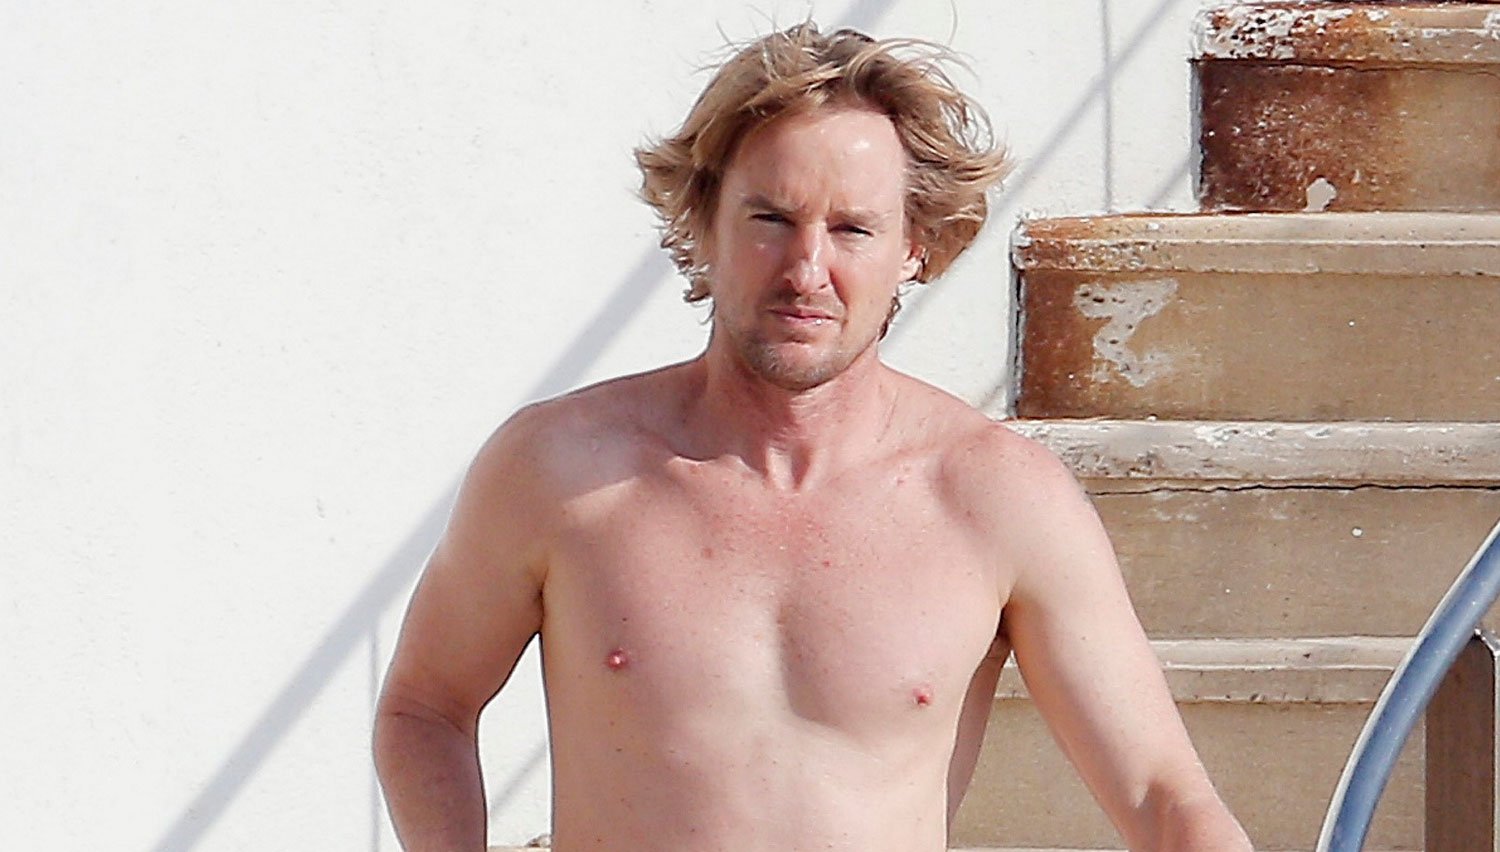 Owen Wilson Goes Shirtless & Bares Fit Body in France.